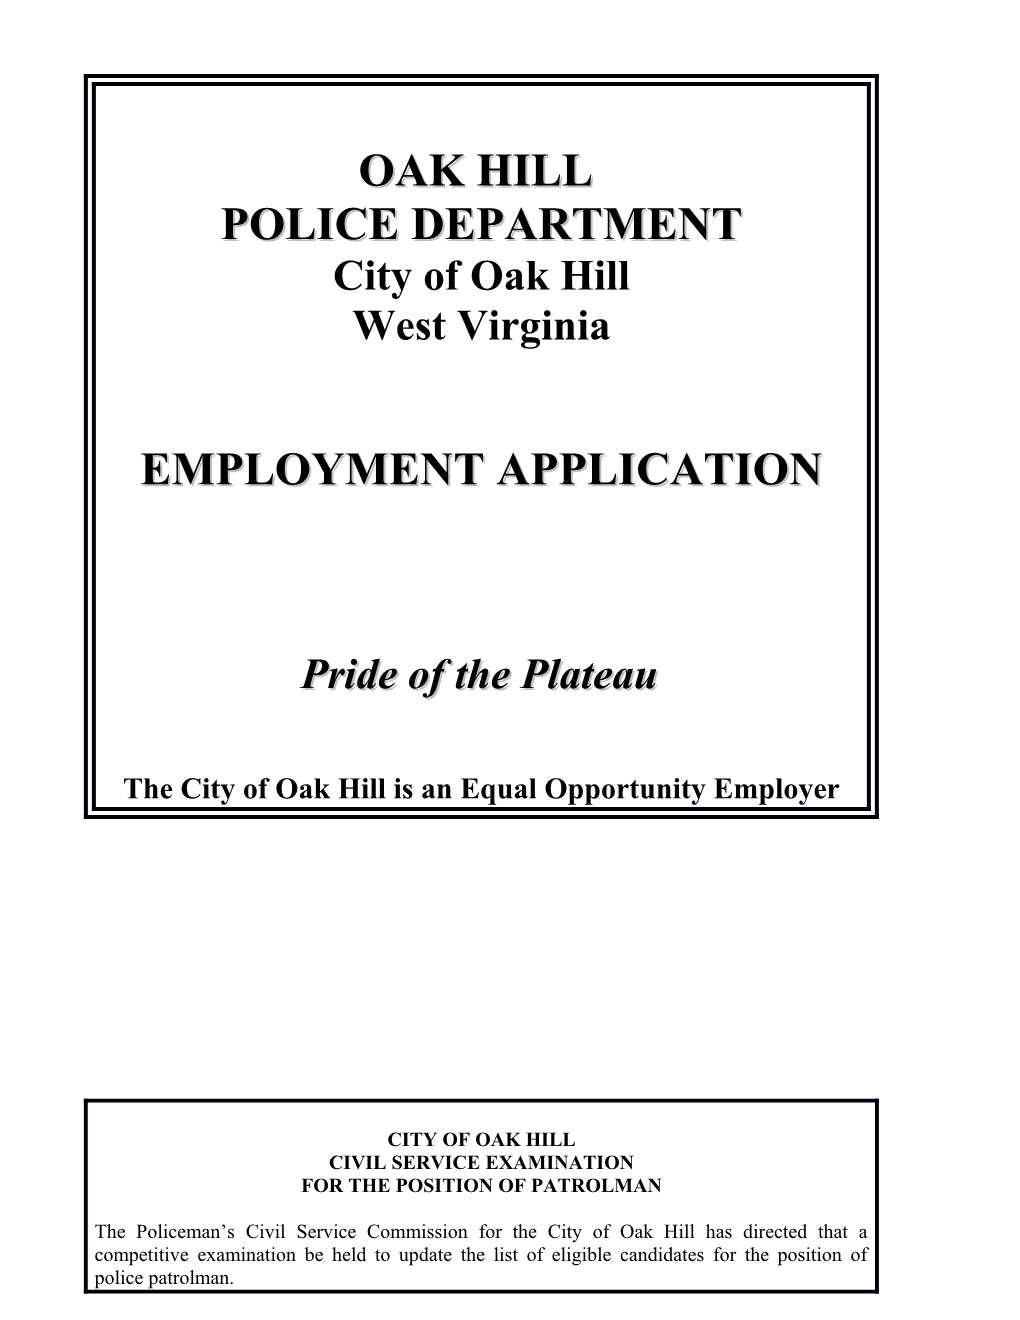 The City of Oak Hill Is an Equal Opportunity Employer